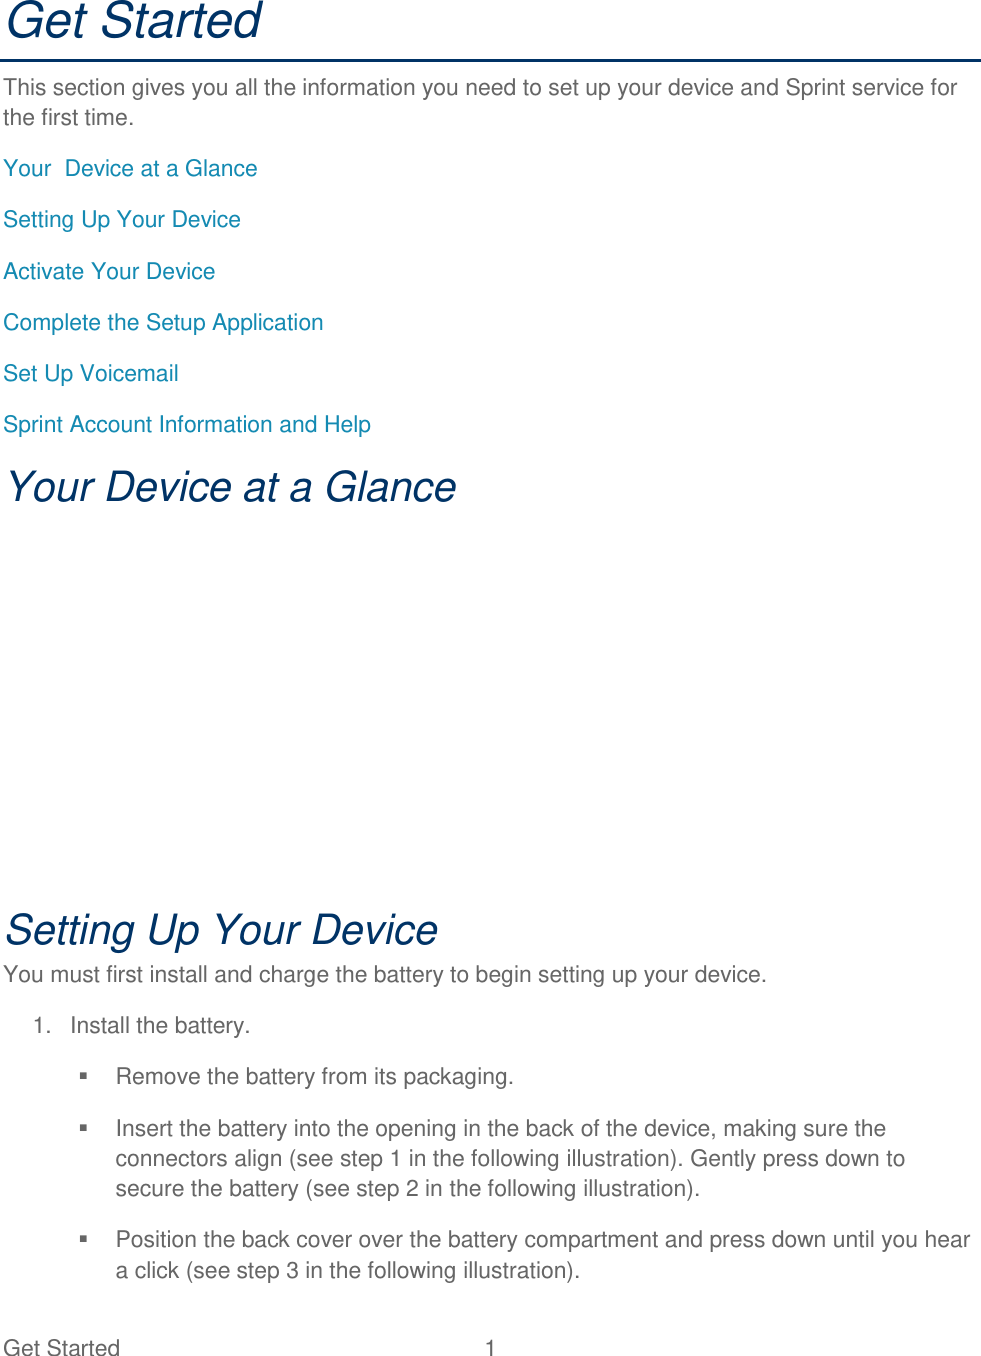 Get Started  1 Get Started This section gives you all the information you need to set up your device and Sprint service for the first time. Your  Device at a Glance  Setting Up Your Device  Activate Your Device  Complete the Setup Application  Set Up Voicemail  Sprint Account Information and Help  Your Device at a Glance  Setting Up Your Device You must first install and charge the battery to begin setting up your device.  1.  Install the battery.   Remove the battery from its packaging.   Insert the battery into the opening in the back of the device, making sure the connectors align (see step 1 in the following illustration). Gently press down to secure the battery (see step 2 in the following illustration).   Position the back cover over the battery compartment and press down until you hear a click (see step 3 in the following illustration). 